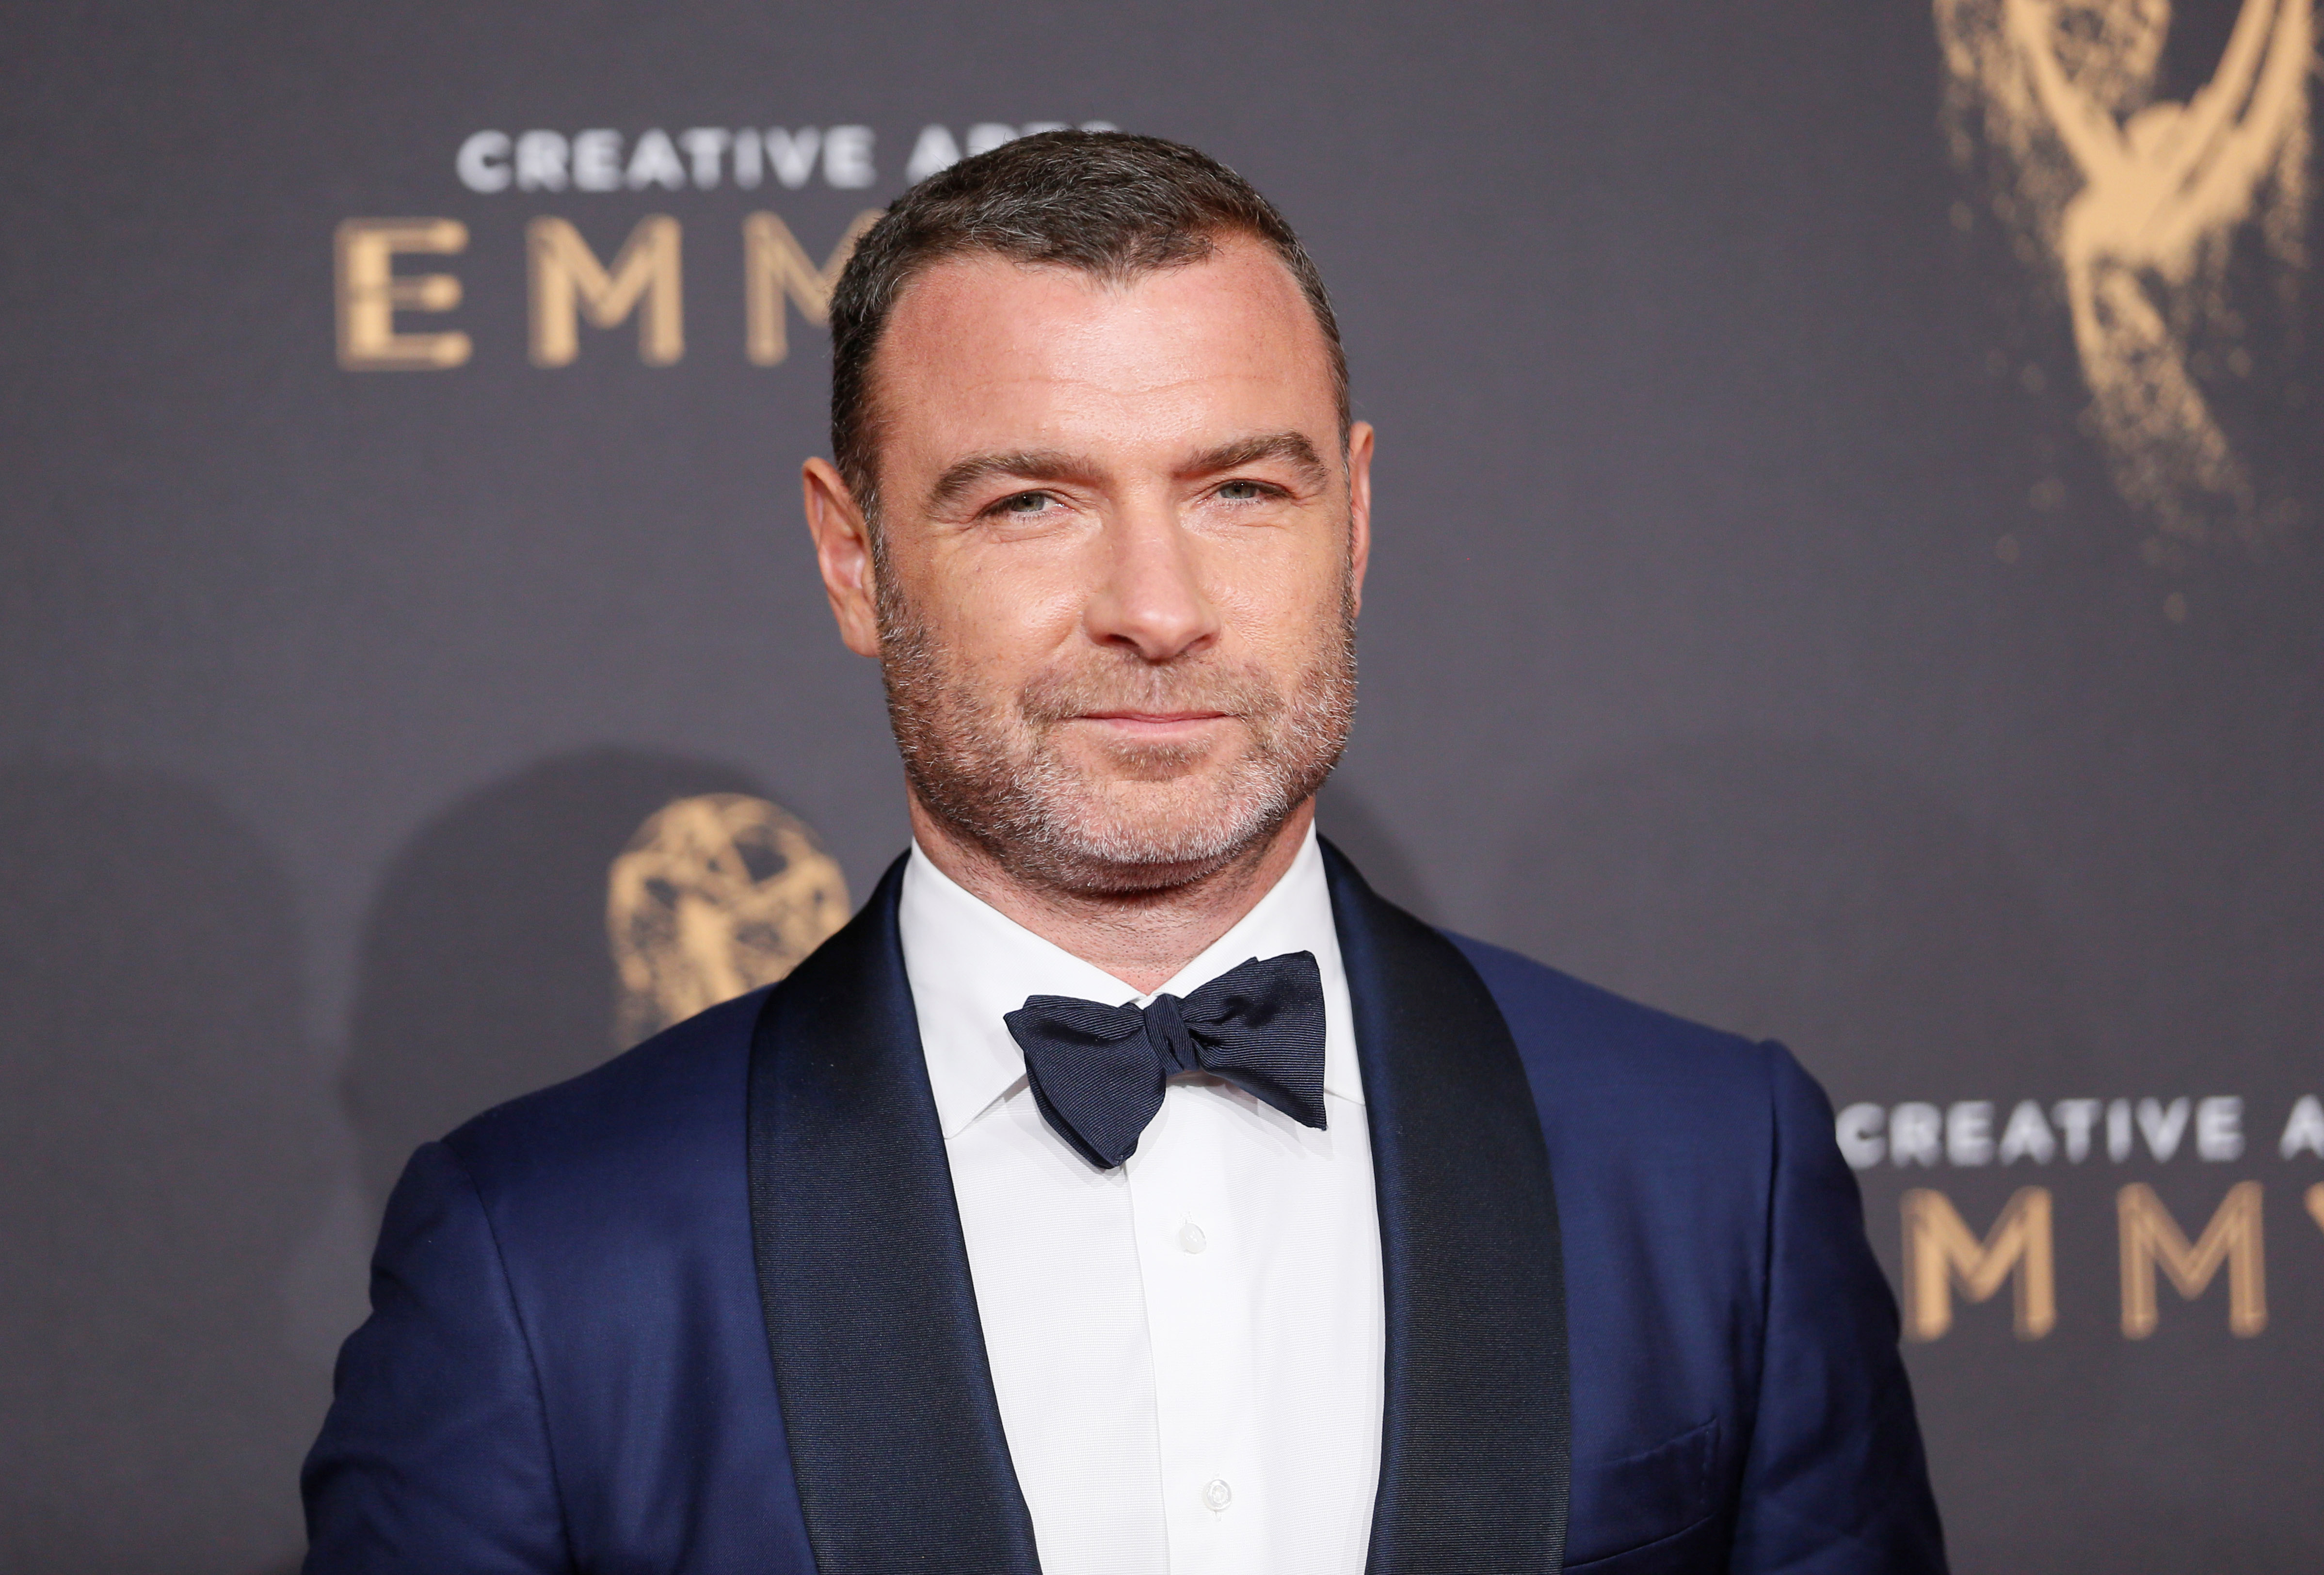 Actor Liev Schreiber poses at the 2017 Creative Arts Emmy Awards in Los Angeles, California